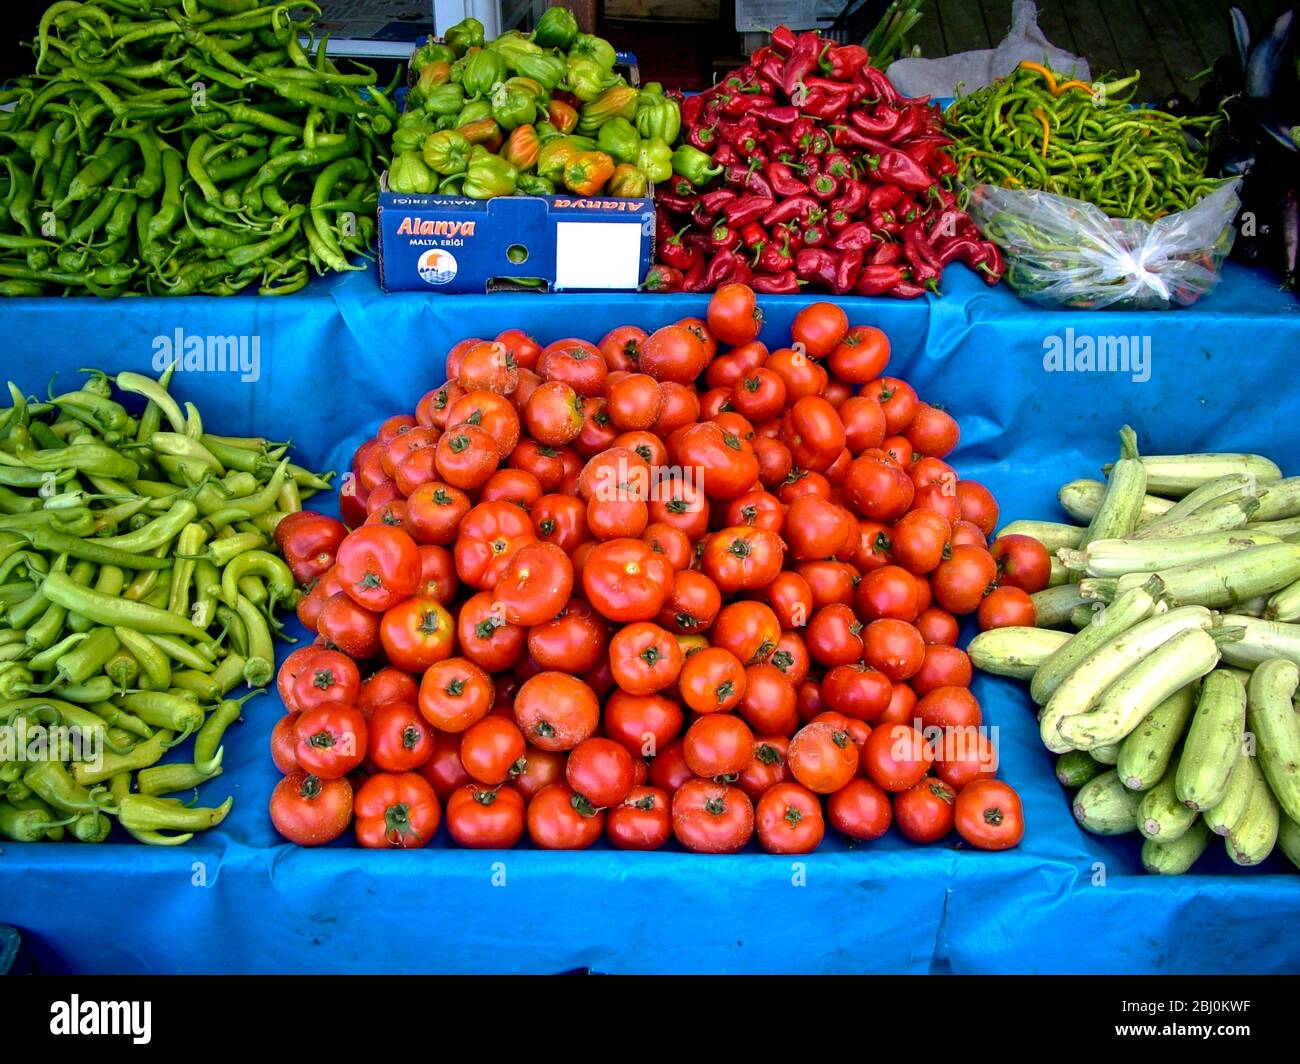 Selection of fresh vegetables - tomatoes, cucumbers and several varieties of peppers on market stall outside shop in Dalayan, Anatolia, southern Turke Stock Photo